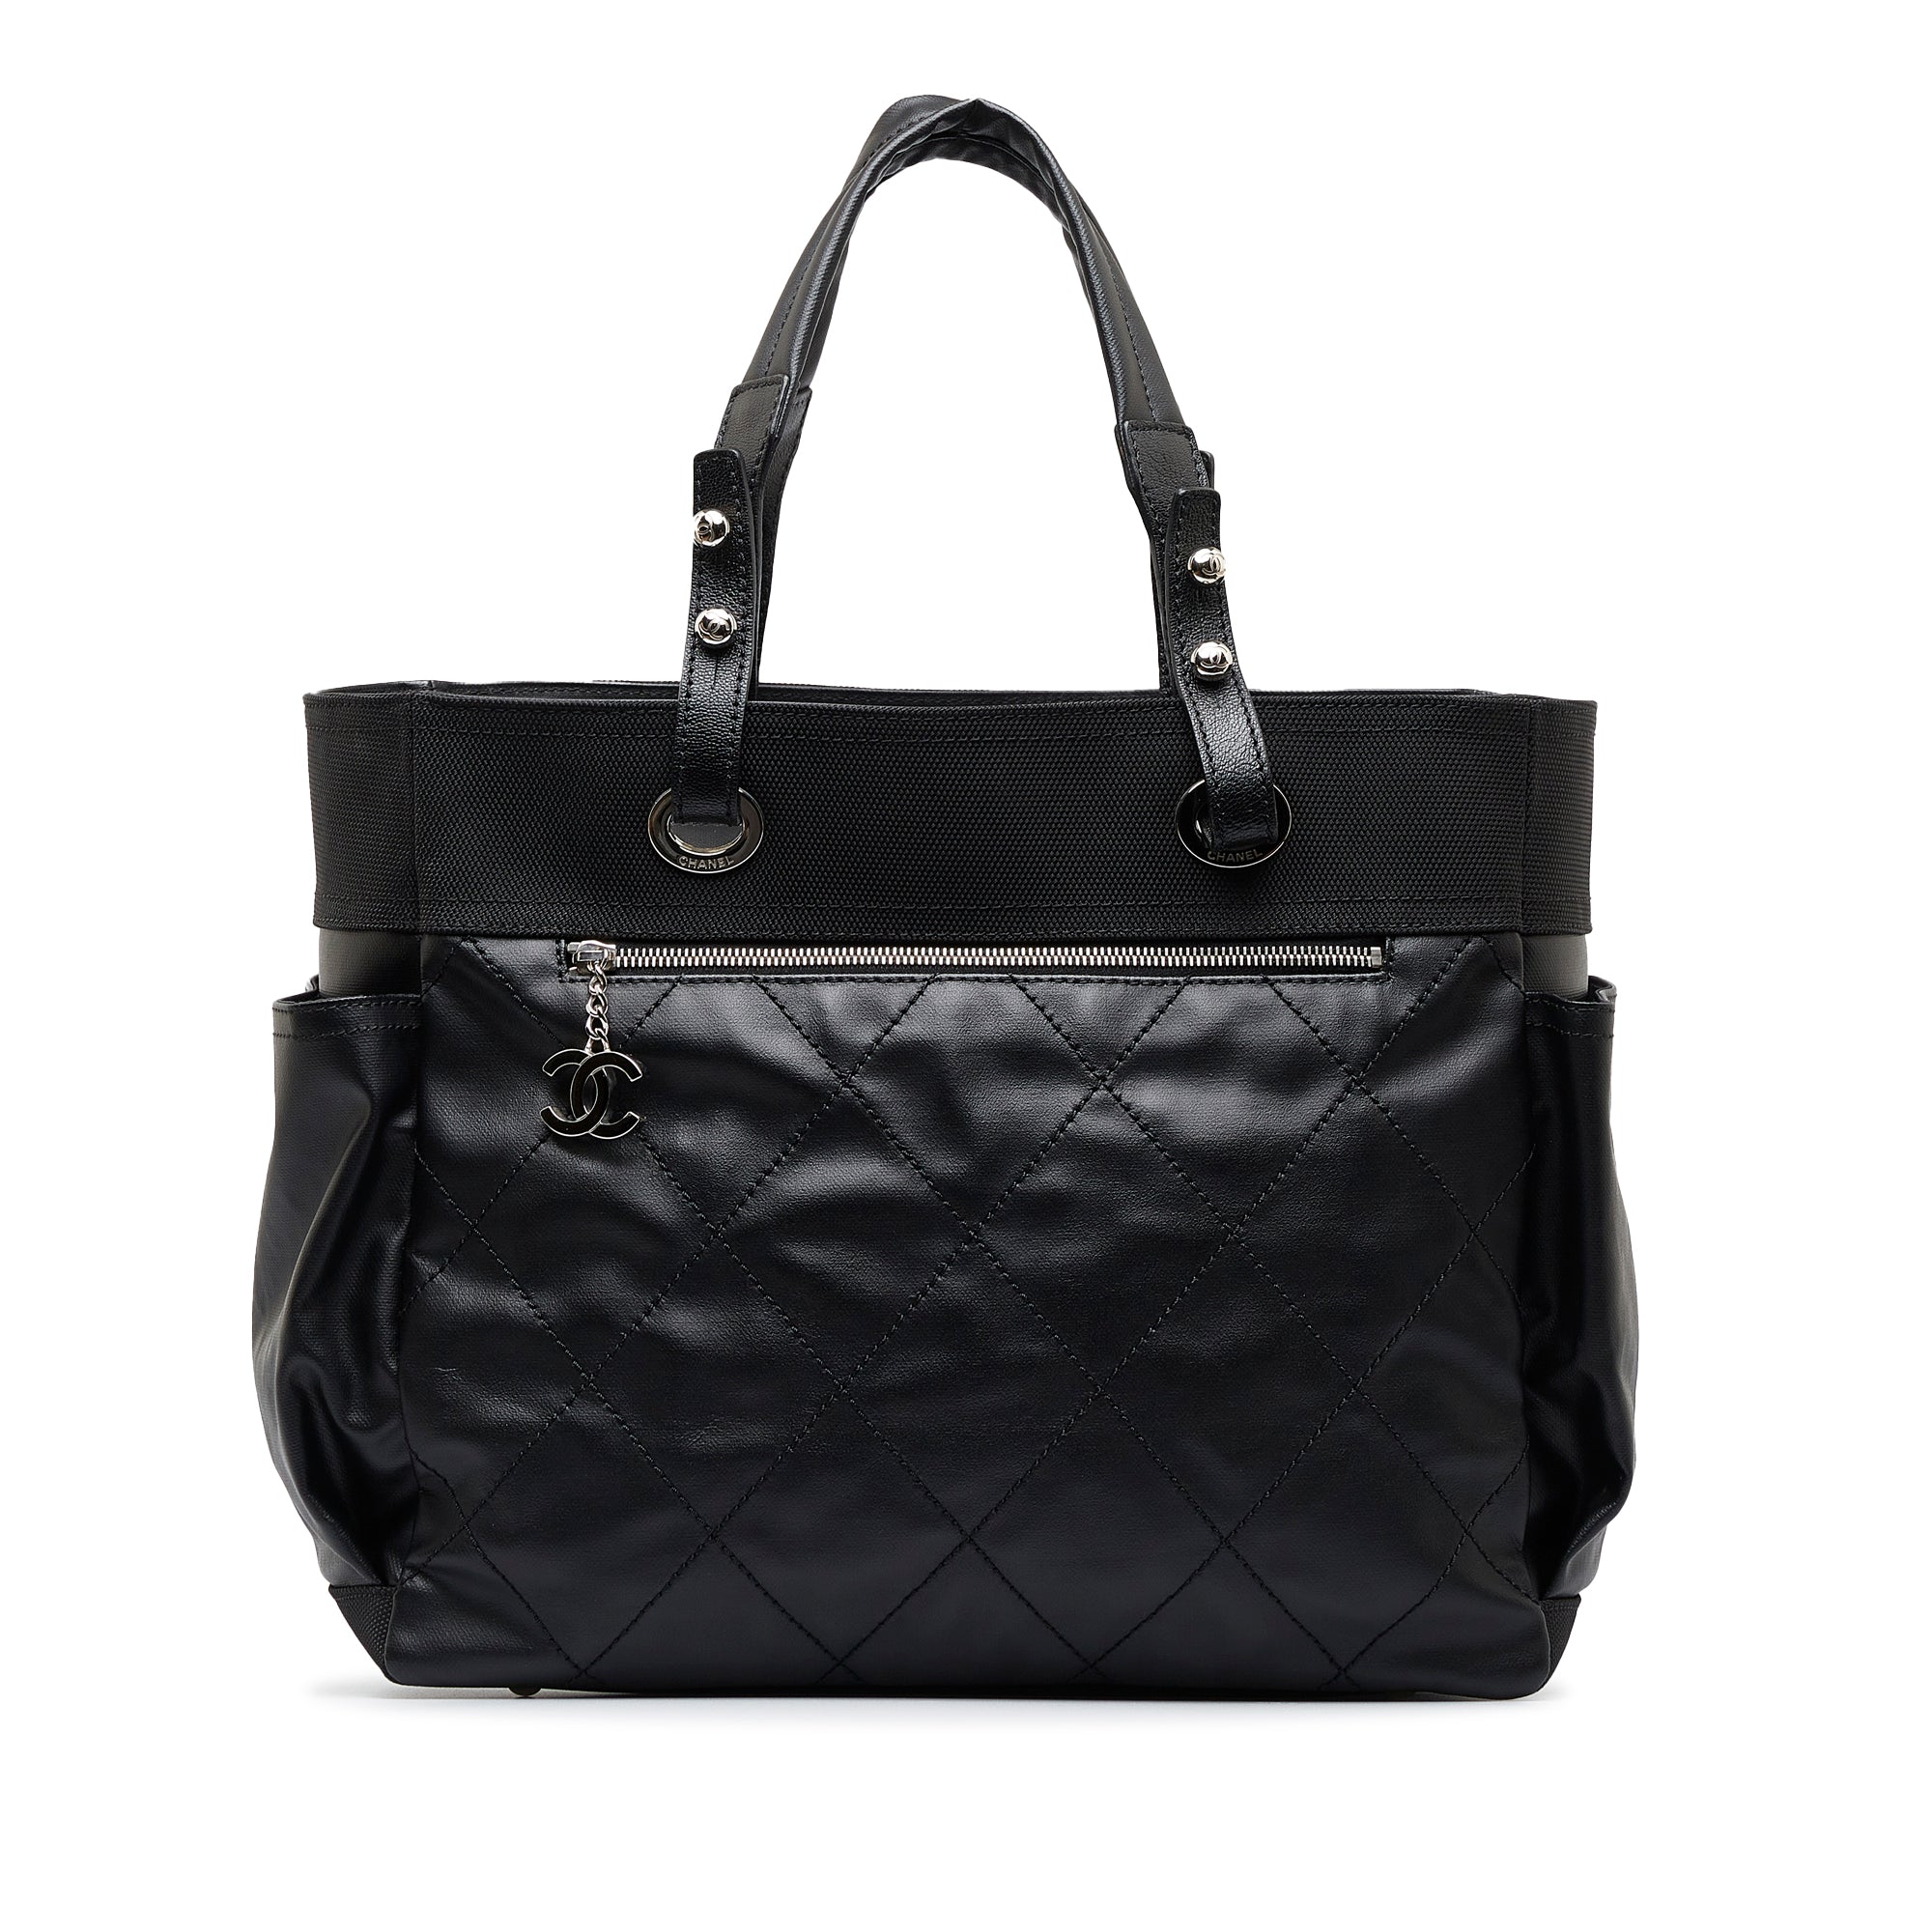 CHANEL Paris Biarritz Tote Black Coated Canvas Leather Small Tote